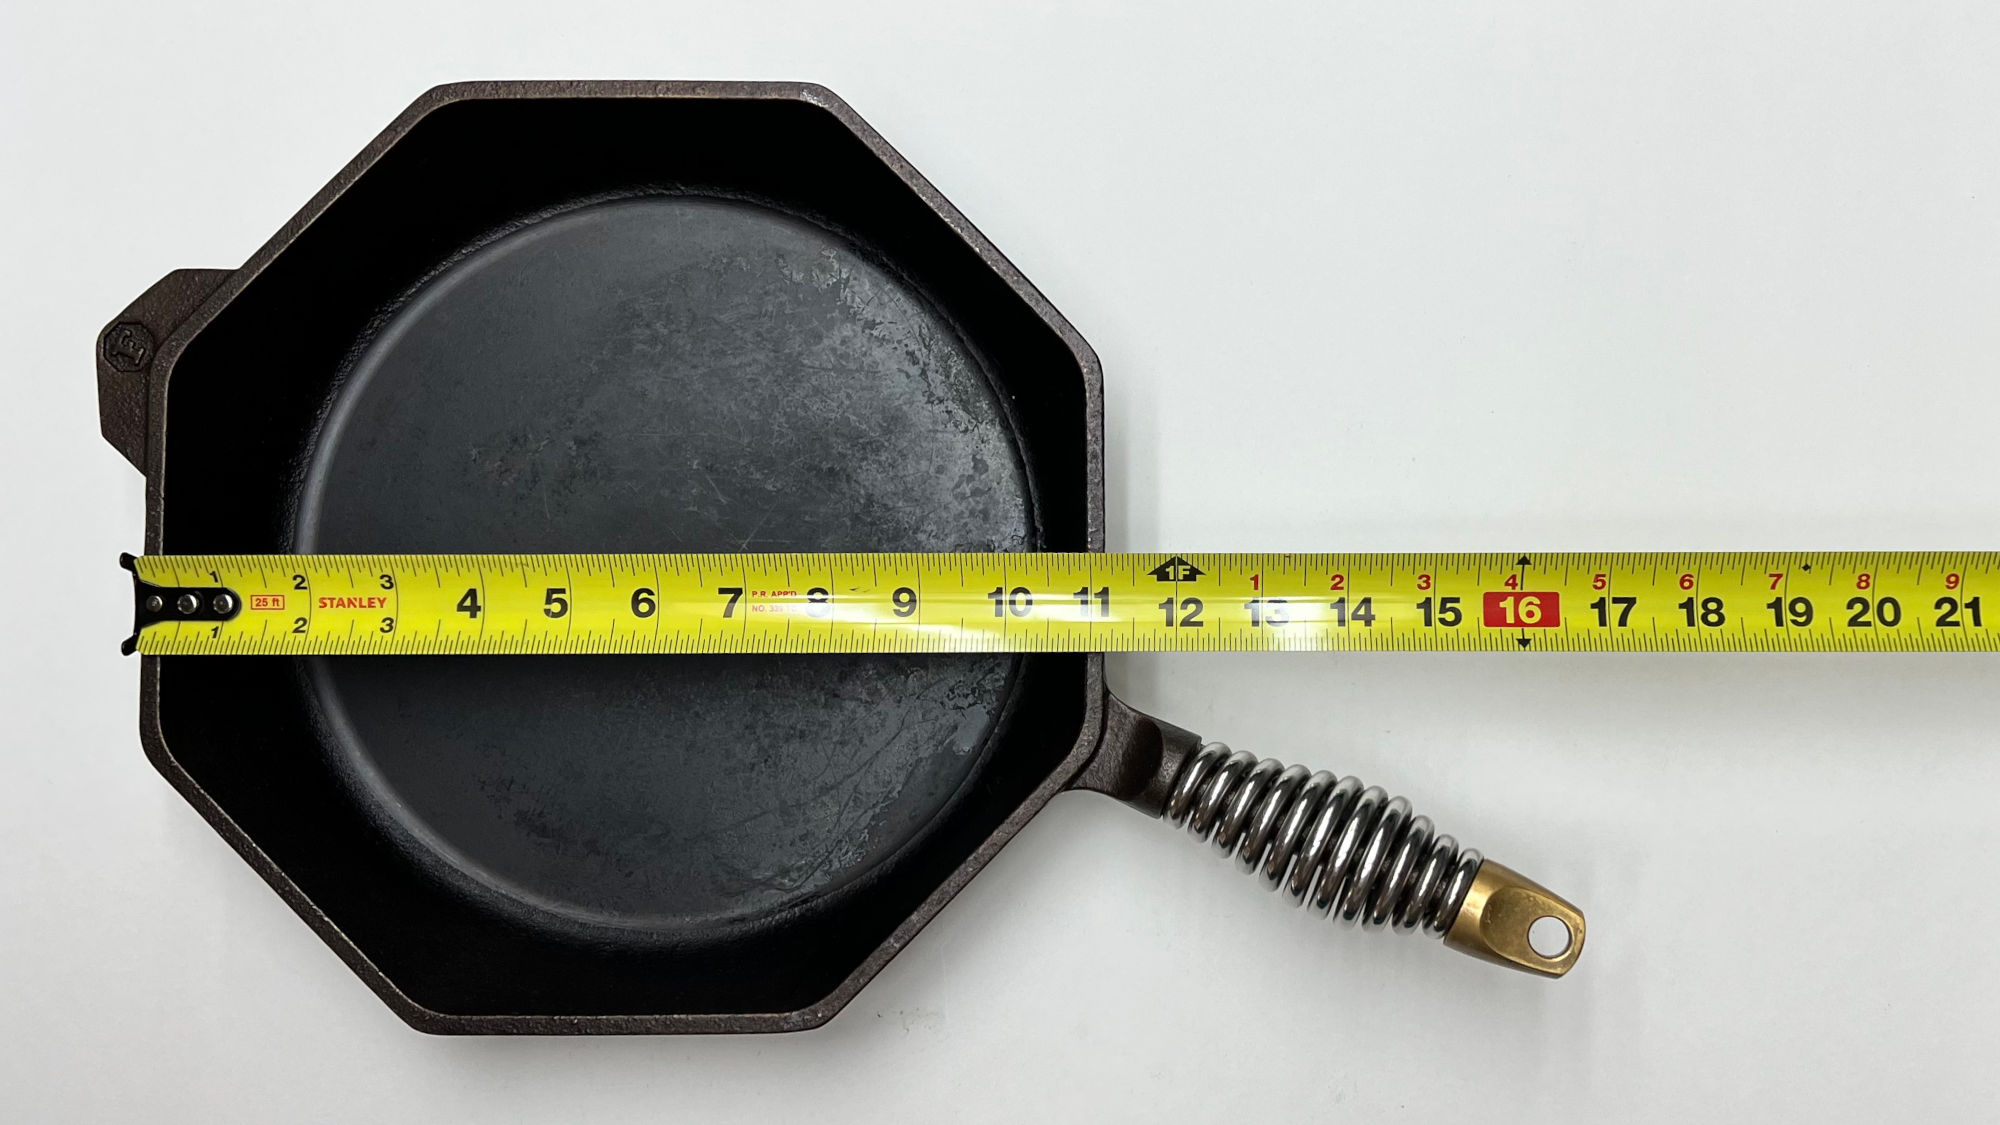 Finex Cast Iron Pan 11 inches